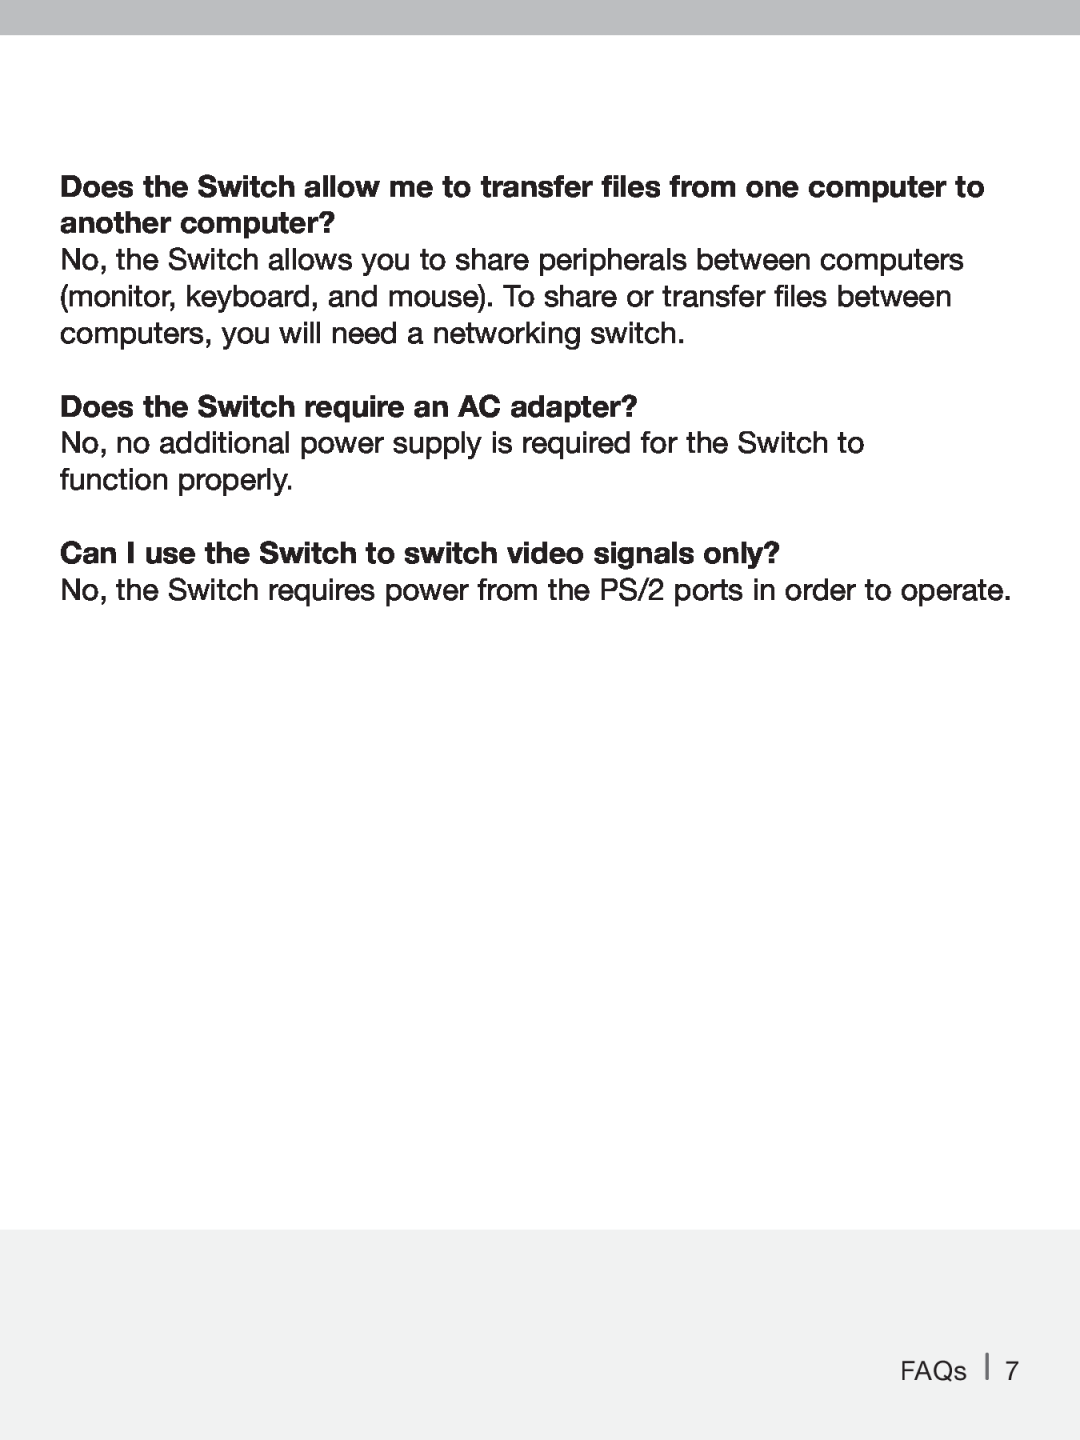 Belkin P74242-D manual Does the Switch require an AC adapter?, Can I use the Switch to switch video signals only? 